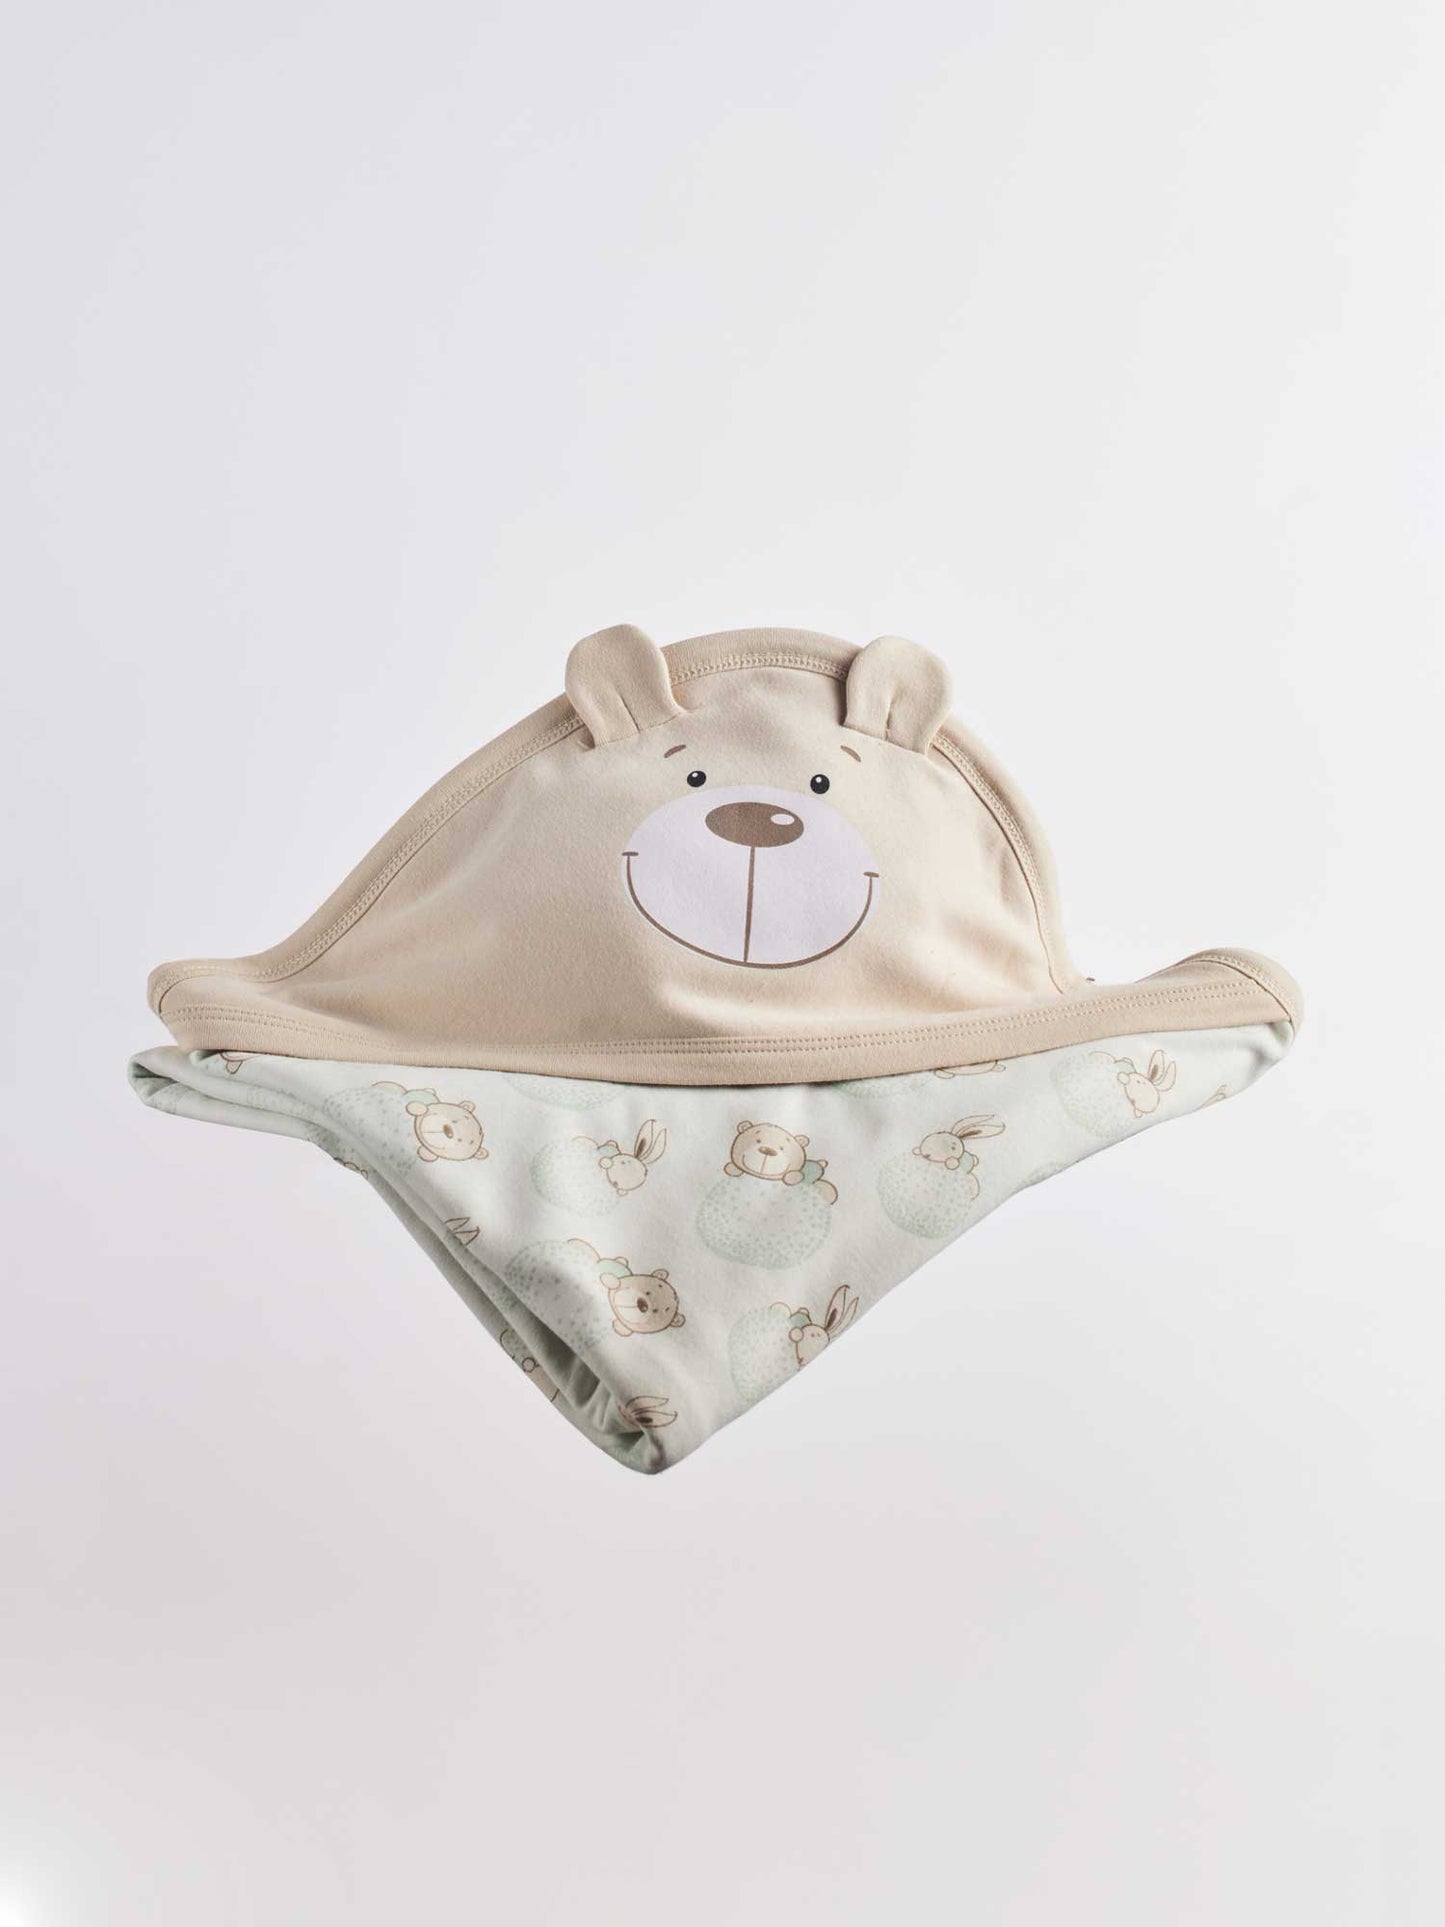 Baby Blanket Bear and Bunny was designed with comfort in mind! It features a soft cotton fabric with a light and breathable material that is perfect for all seasons. The eye-catching patterned print will add a modern look to your baby's room. 